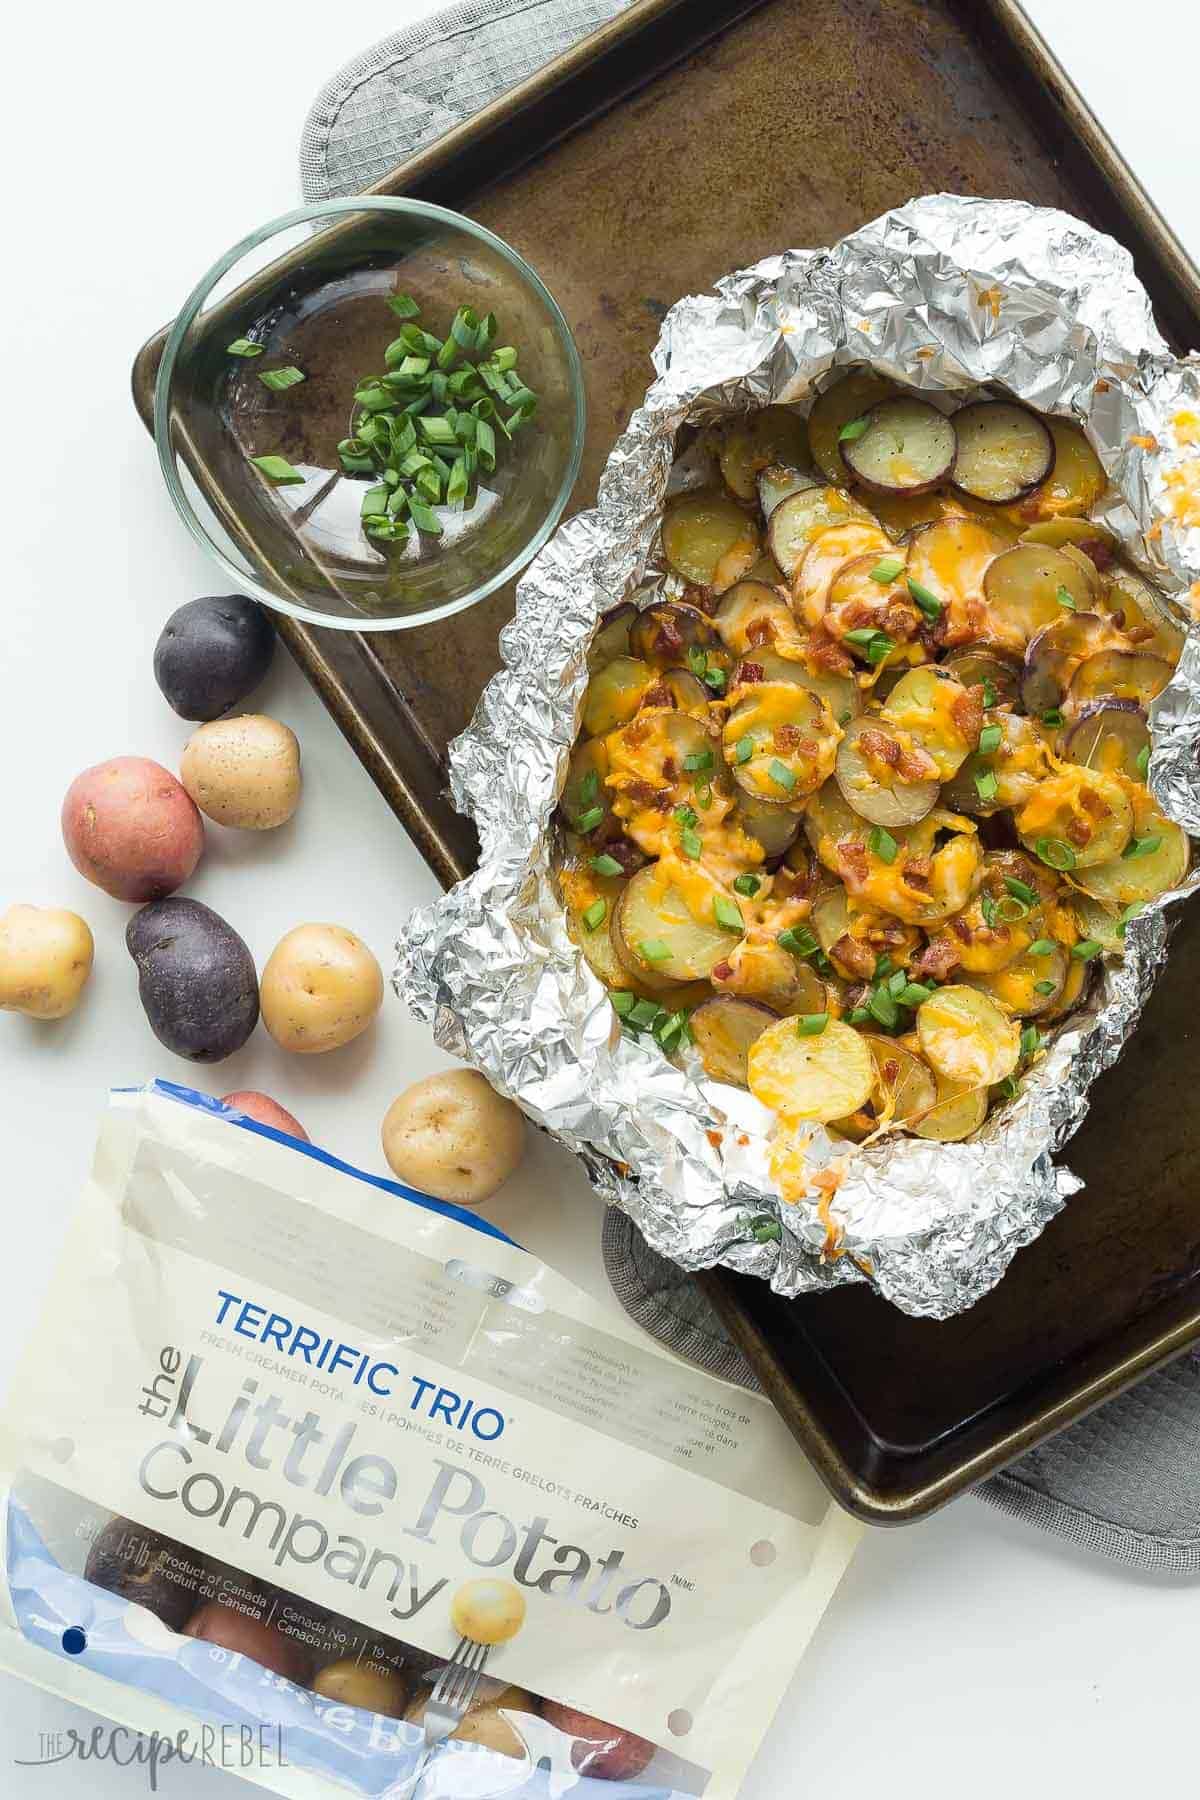 cheesy grilled potatoes overhead in foil pack with open bag of little potatoes on the side